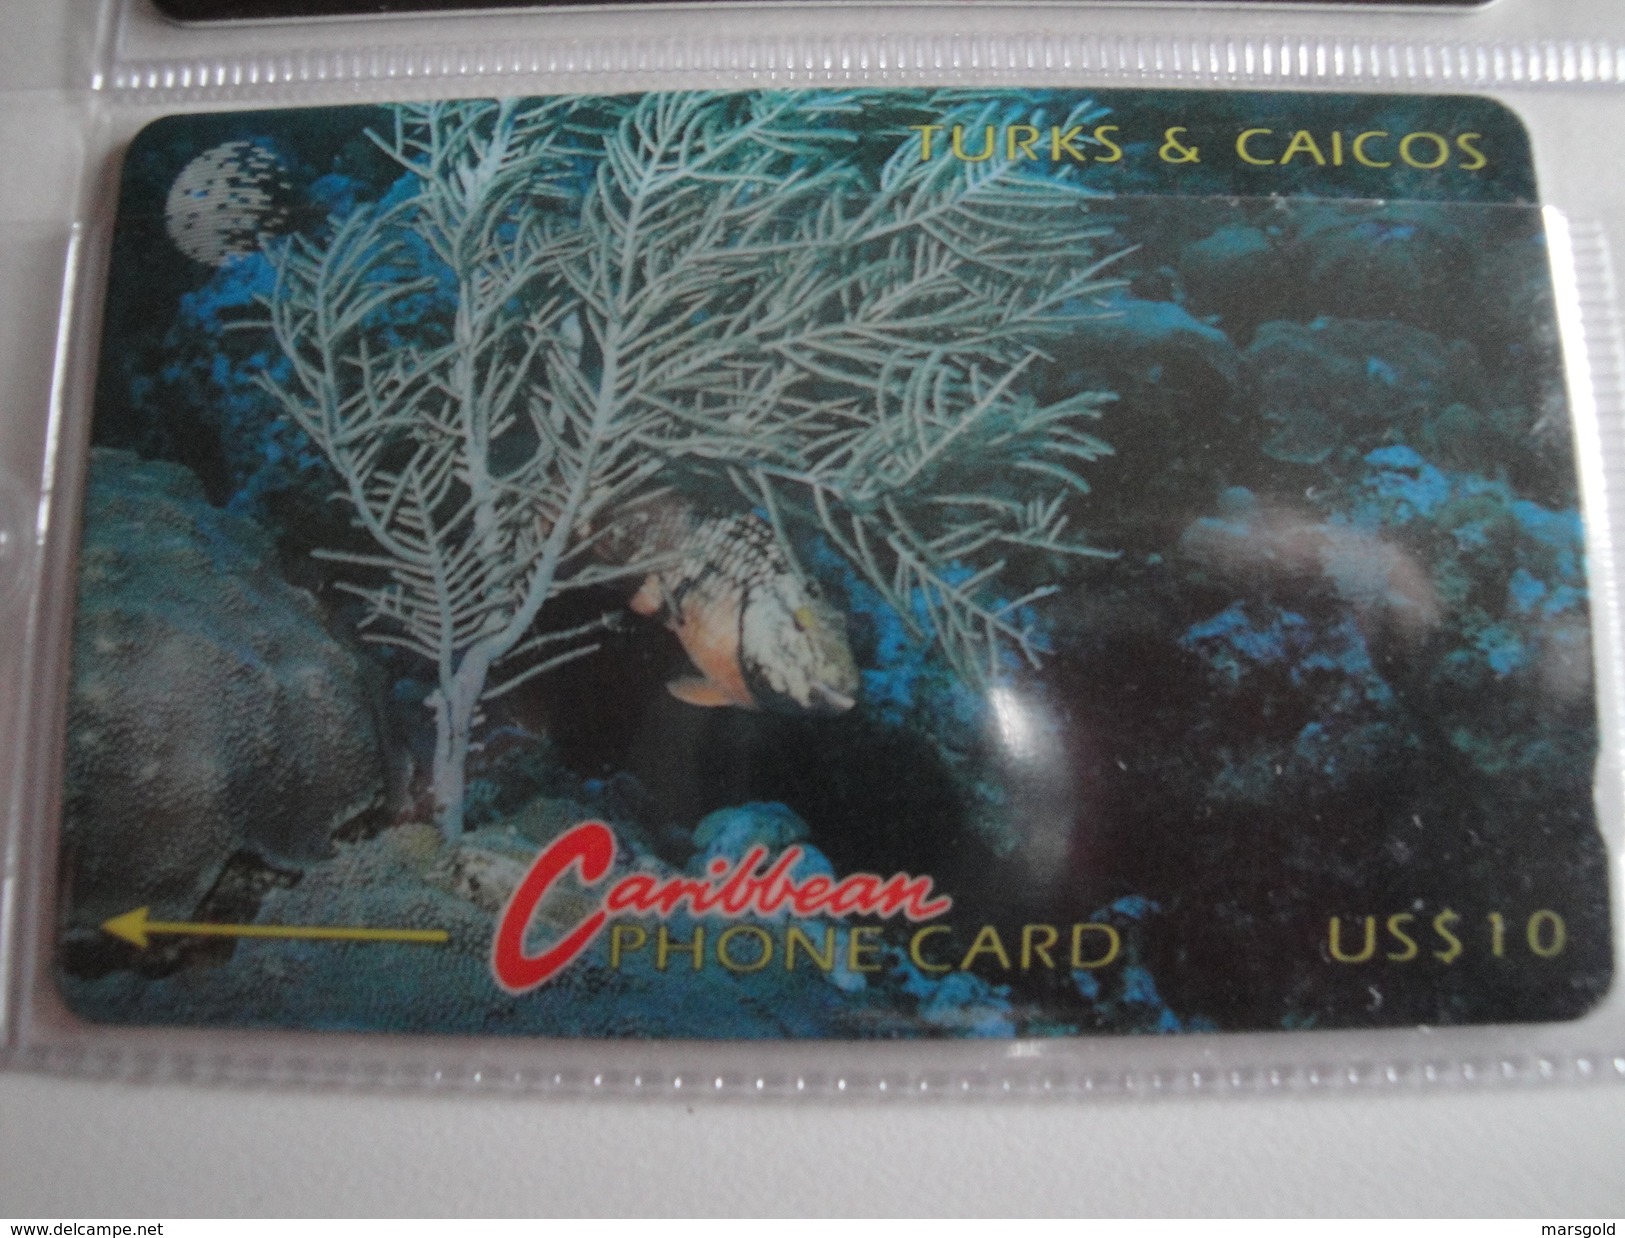 GPT Phonecard From Turks & Caicos - Redband Parrot Fish - 6CTCA - Turks And Caicos Islands